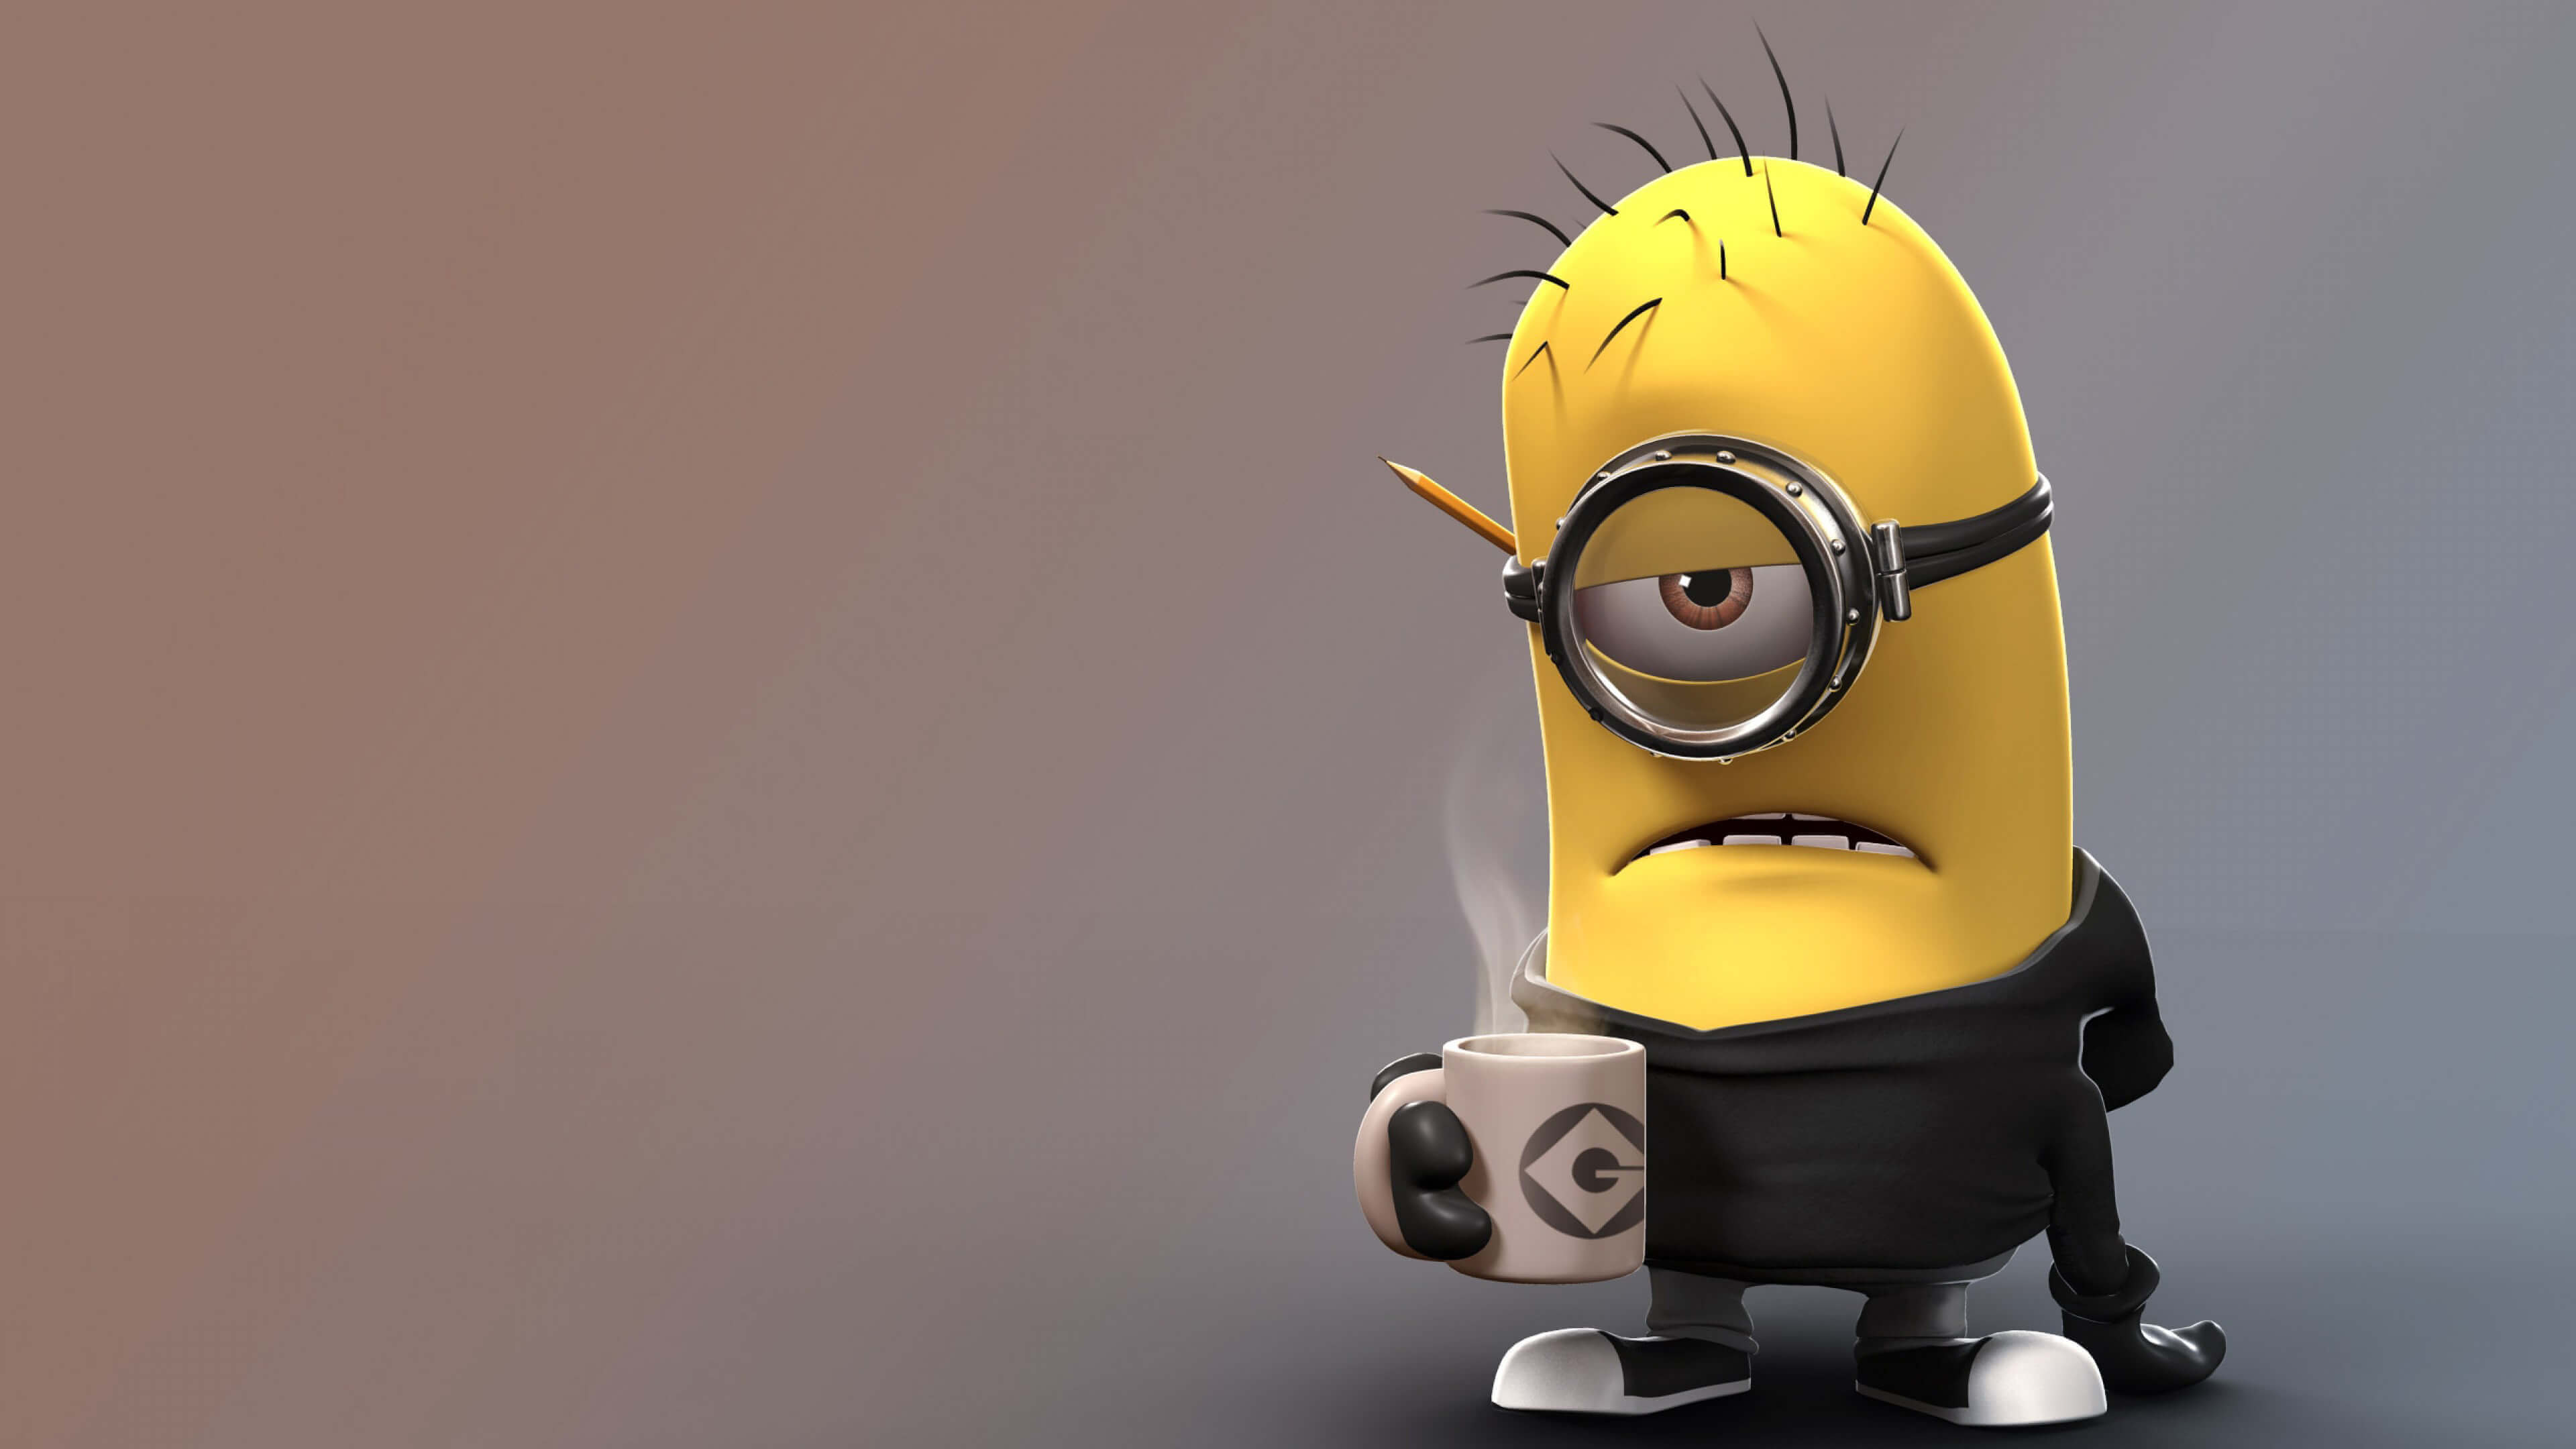 10 Minion Wallpaper Ideas  You think Im crazy now  Idea Wallpapers   iPhone WallpapersColor Schemes